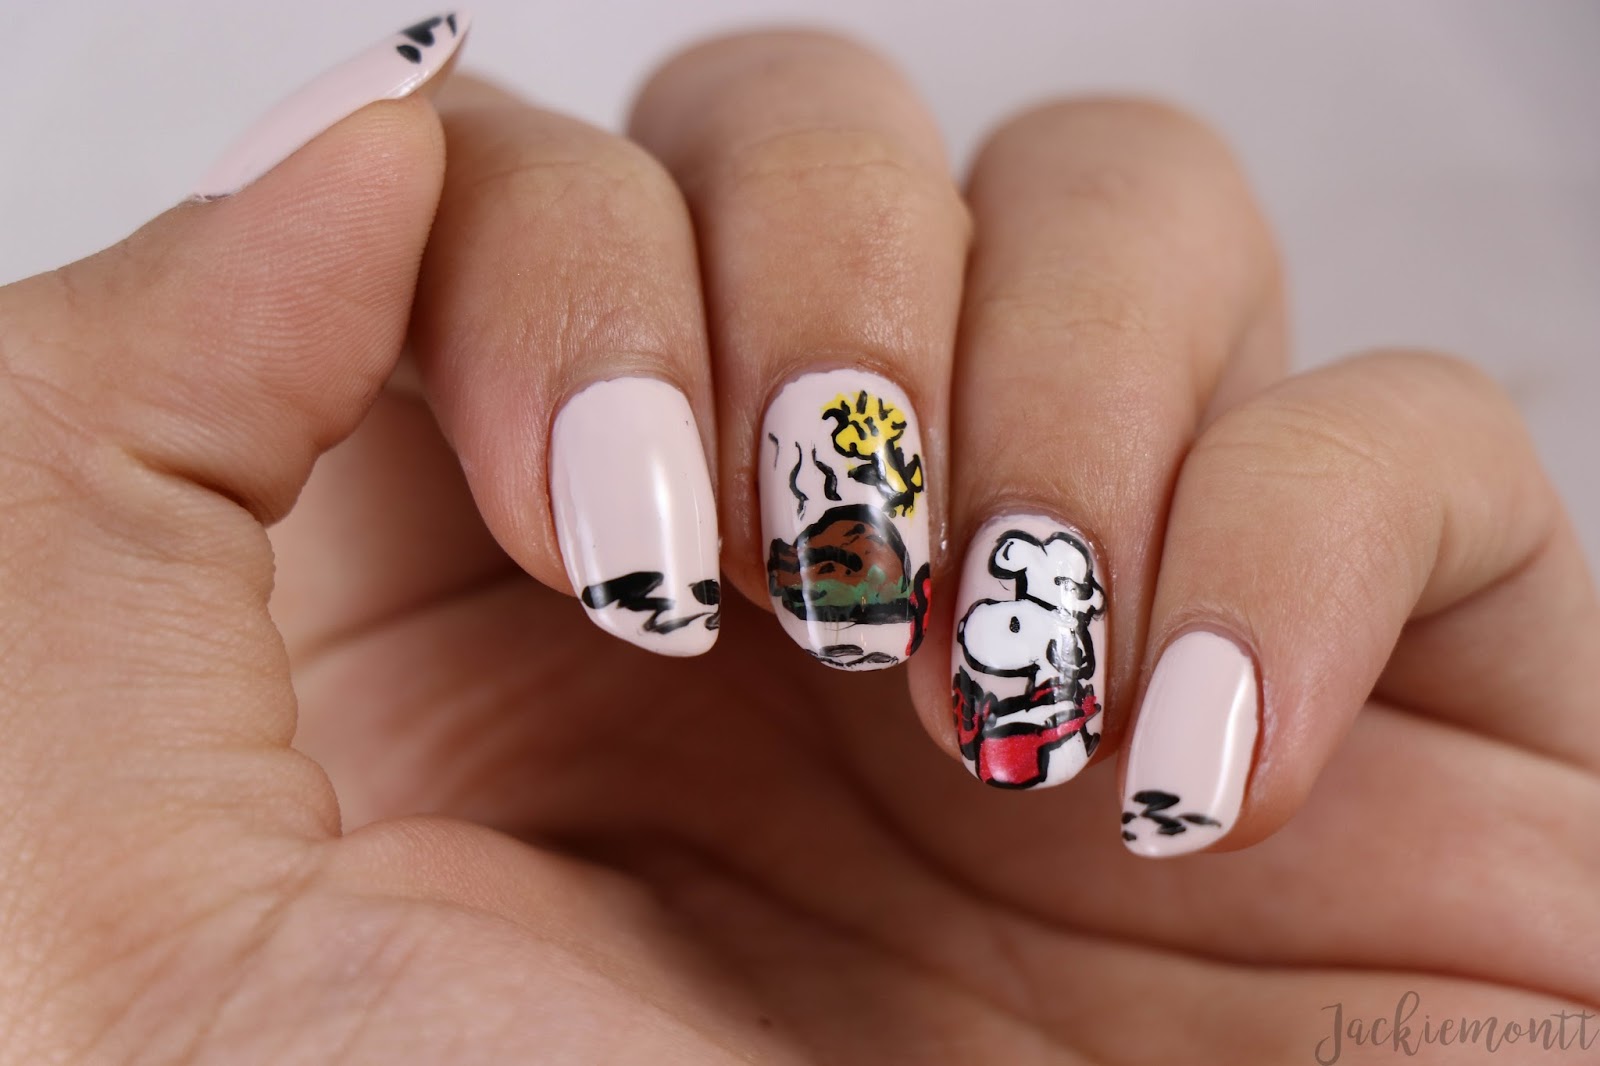 10. "Festive Fall Nail Art for Thanksgiving" - wide 8